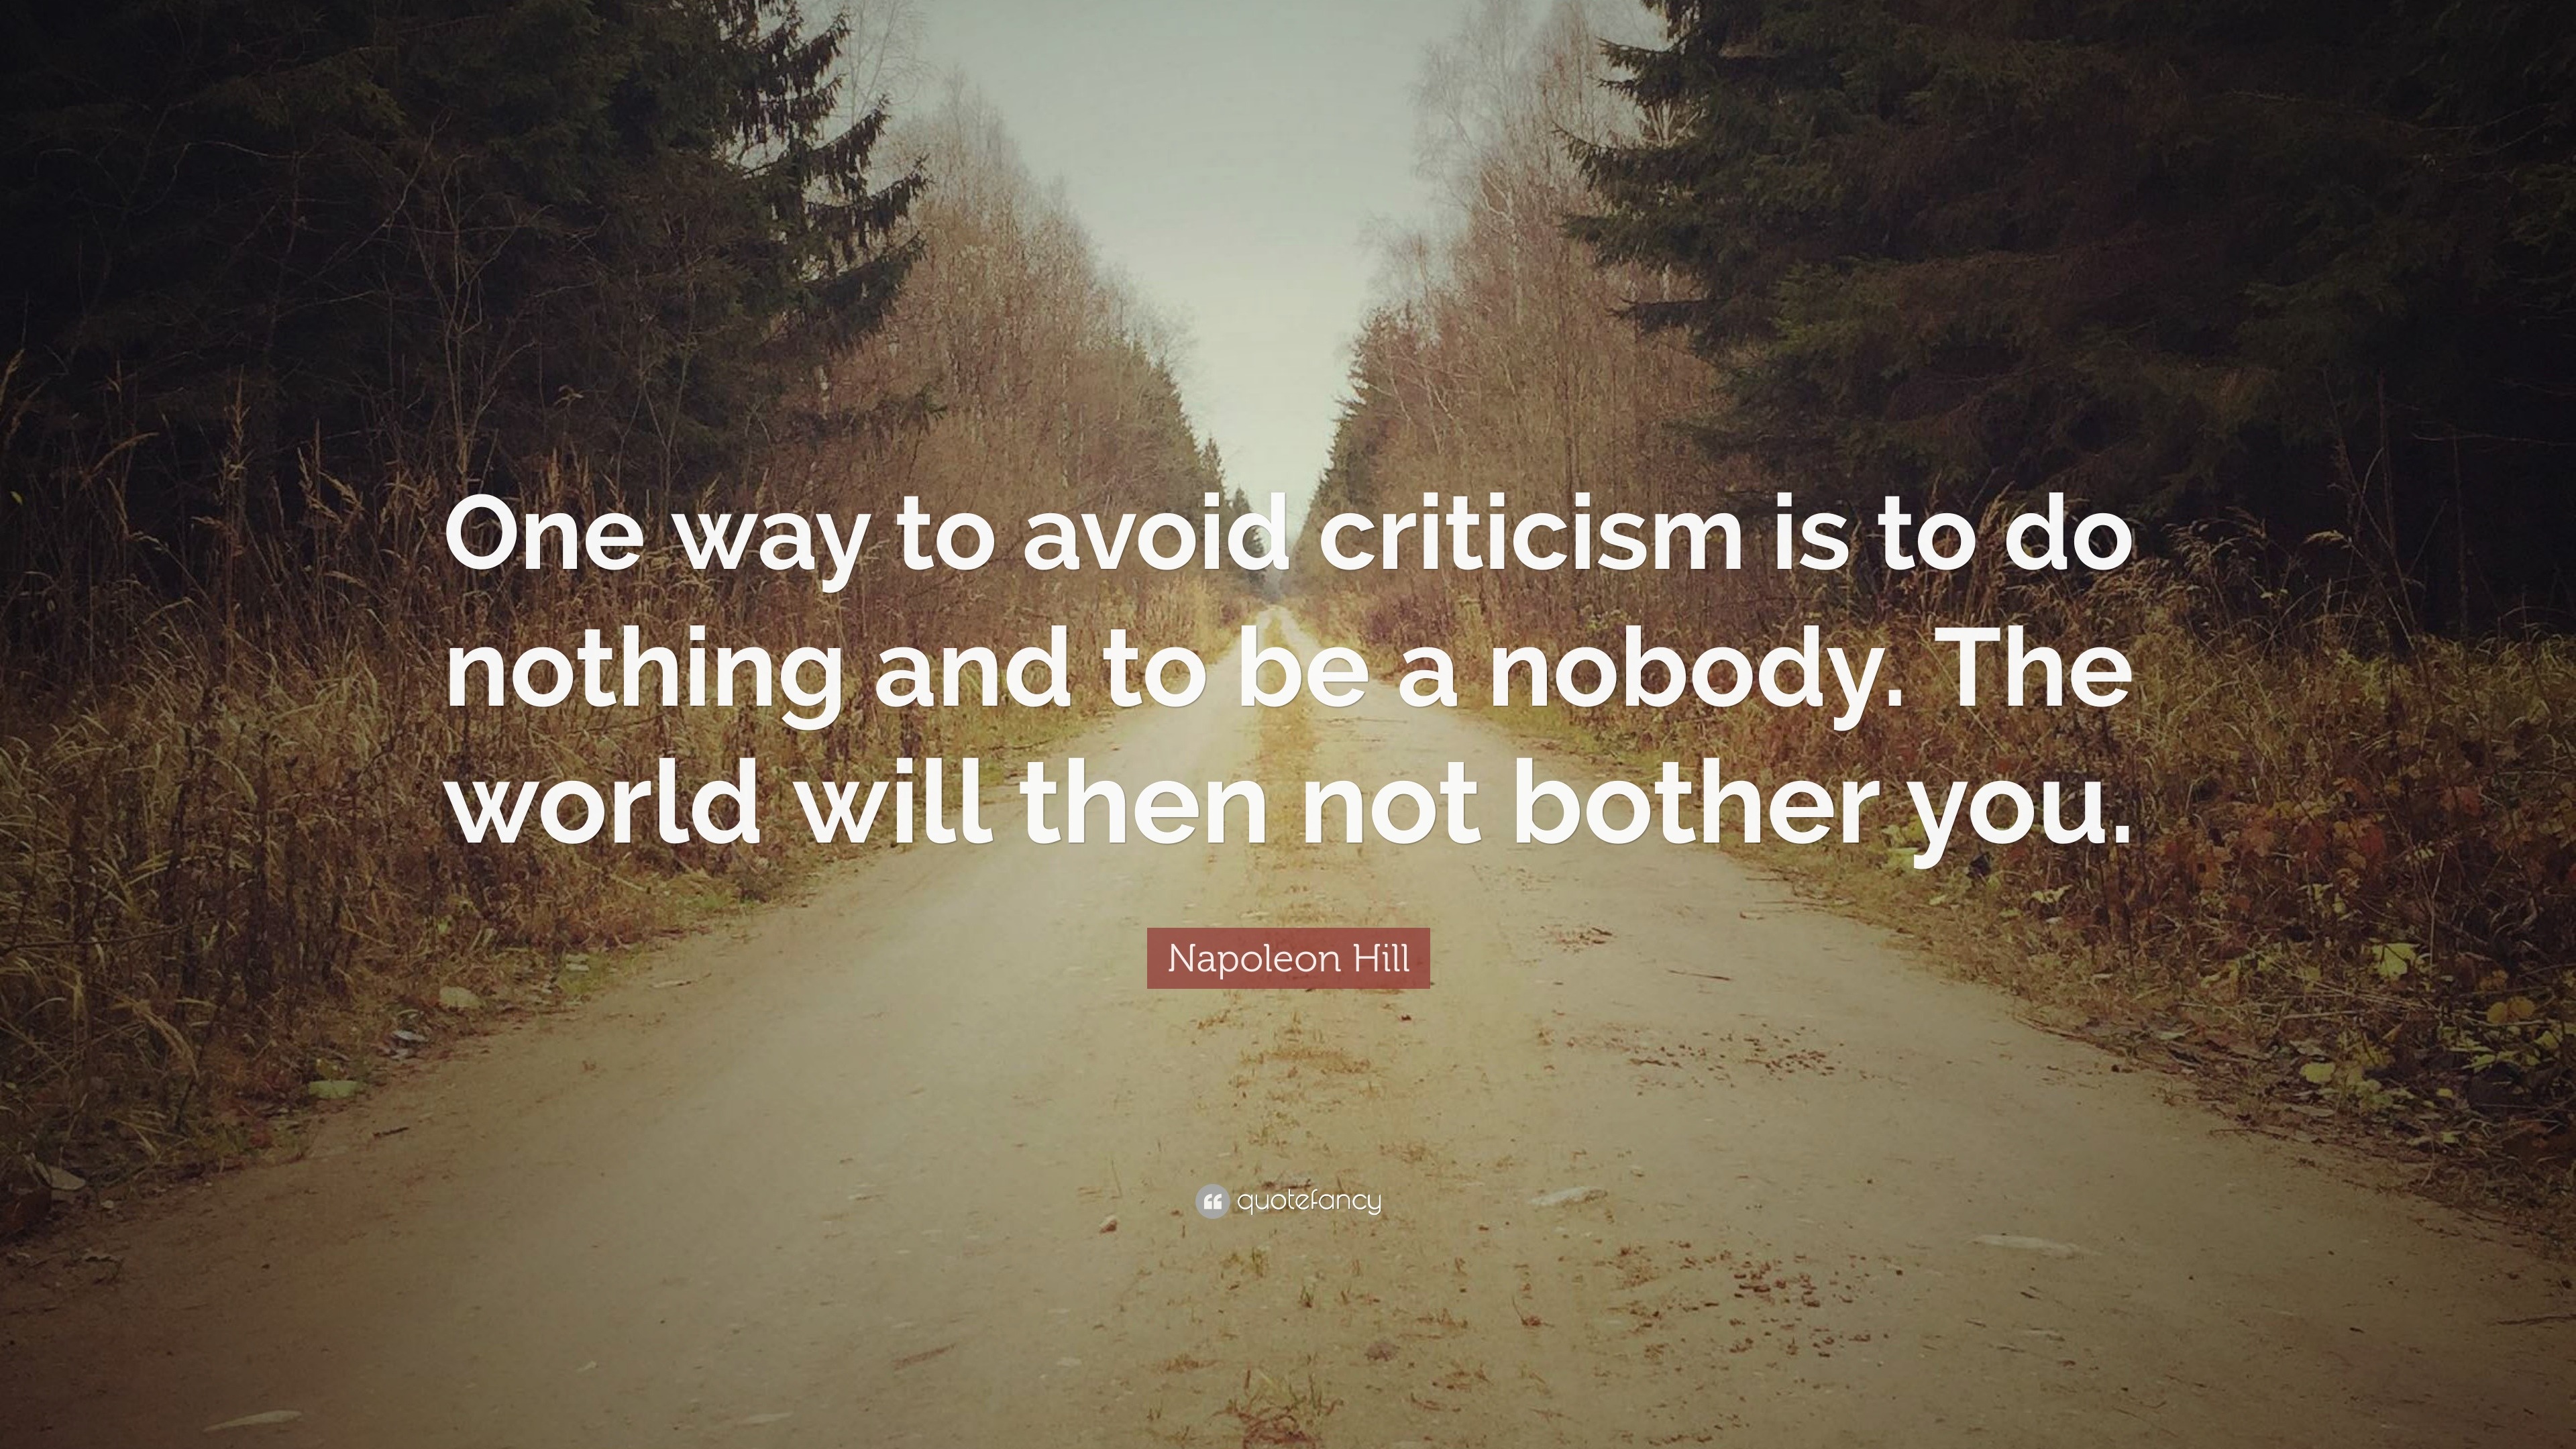 Napoleon Hill Quote: “One way to avoid criticism is to do nothing and ...